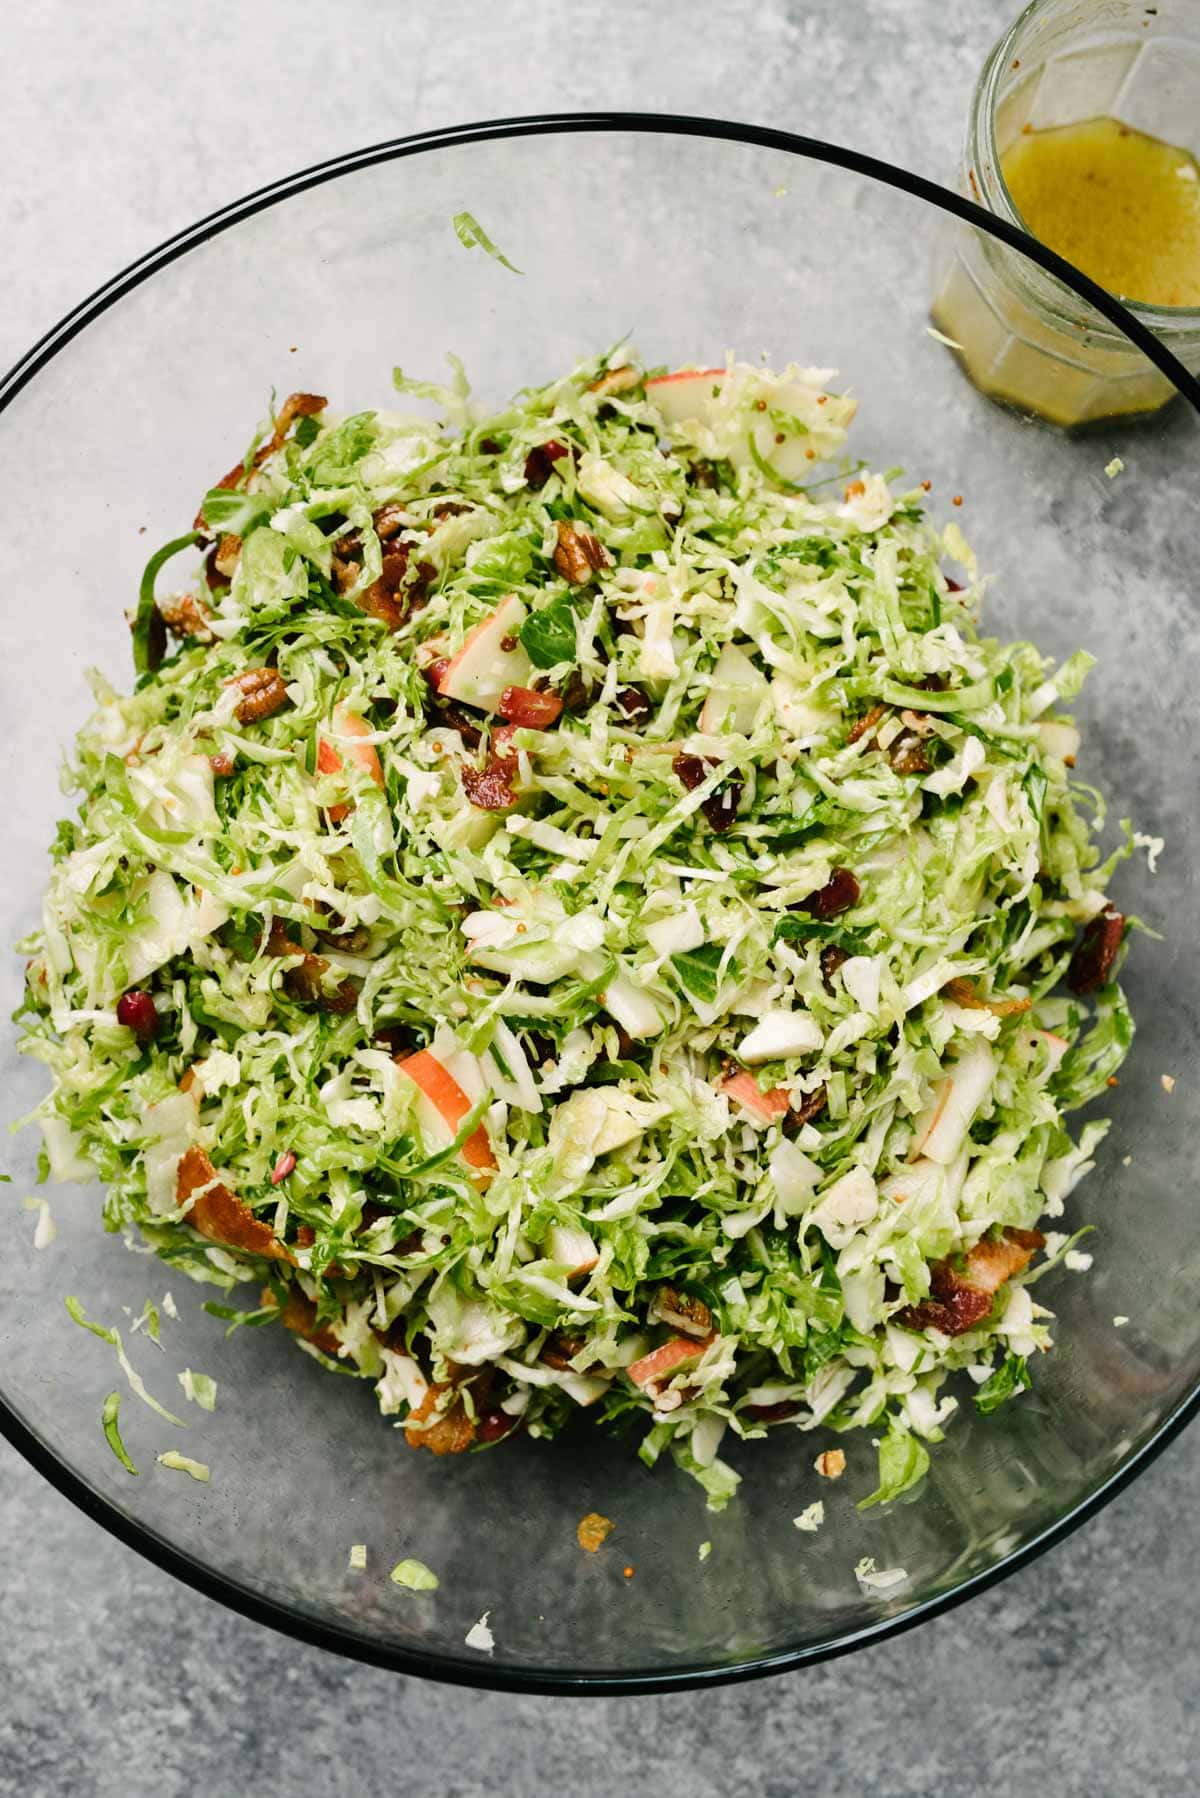 Tossed Brussels sprouts salad with bacon and apples in a large glass mixing bowl, with a small jar of vinaigrette to the side.